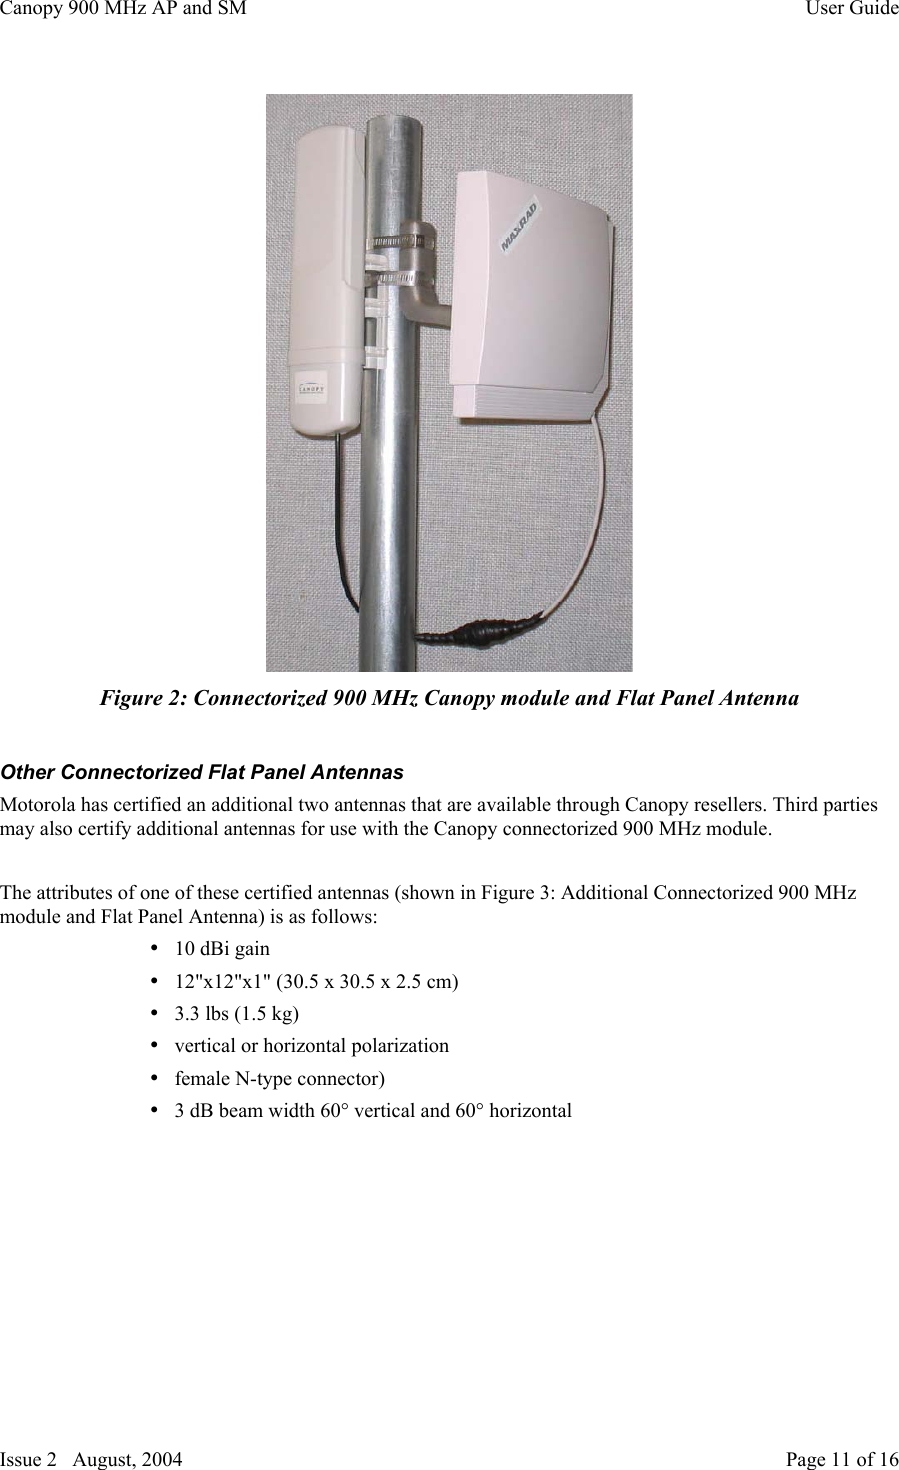 Canopy 900 MHz AP and SM User GuideIssue 2   August, 2004 Page 11 of 16Figure 2: Connectorized 900 MHz Canopy module and Flat Panel AntennaOther Connectorized Flat Panel AntennasMotorola has certified an additional two antennas that are available through Canopy resellers. Third partiesmay also certify additional antennas for use with the Canopy connectorized 900 MHz module.The attributes of one of these certified antennas (shown in Figure 3: Additional Connectorized 900 MHzmodule and Flat Panel Antenna) is as follows:• 10 dBi gain• 12&quot;x12&quot;x1&quot; (30.5 x 30.5 x 2.5 cm)• 3.3 lbs (1.5 kg)• vertical or horizontal polarization• female N-type connector)• 3 dB beam width 60° vertical and 60° horizontal